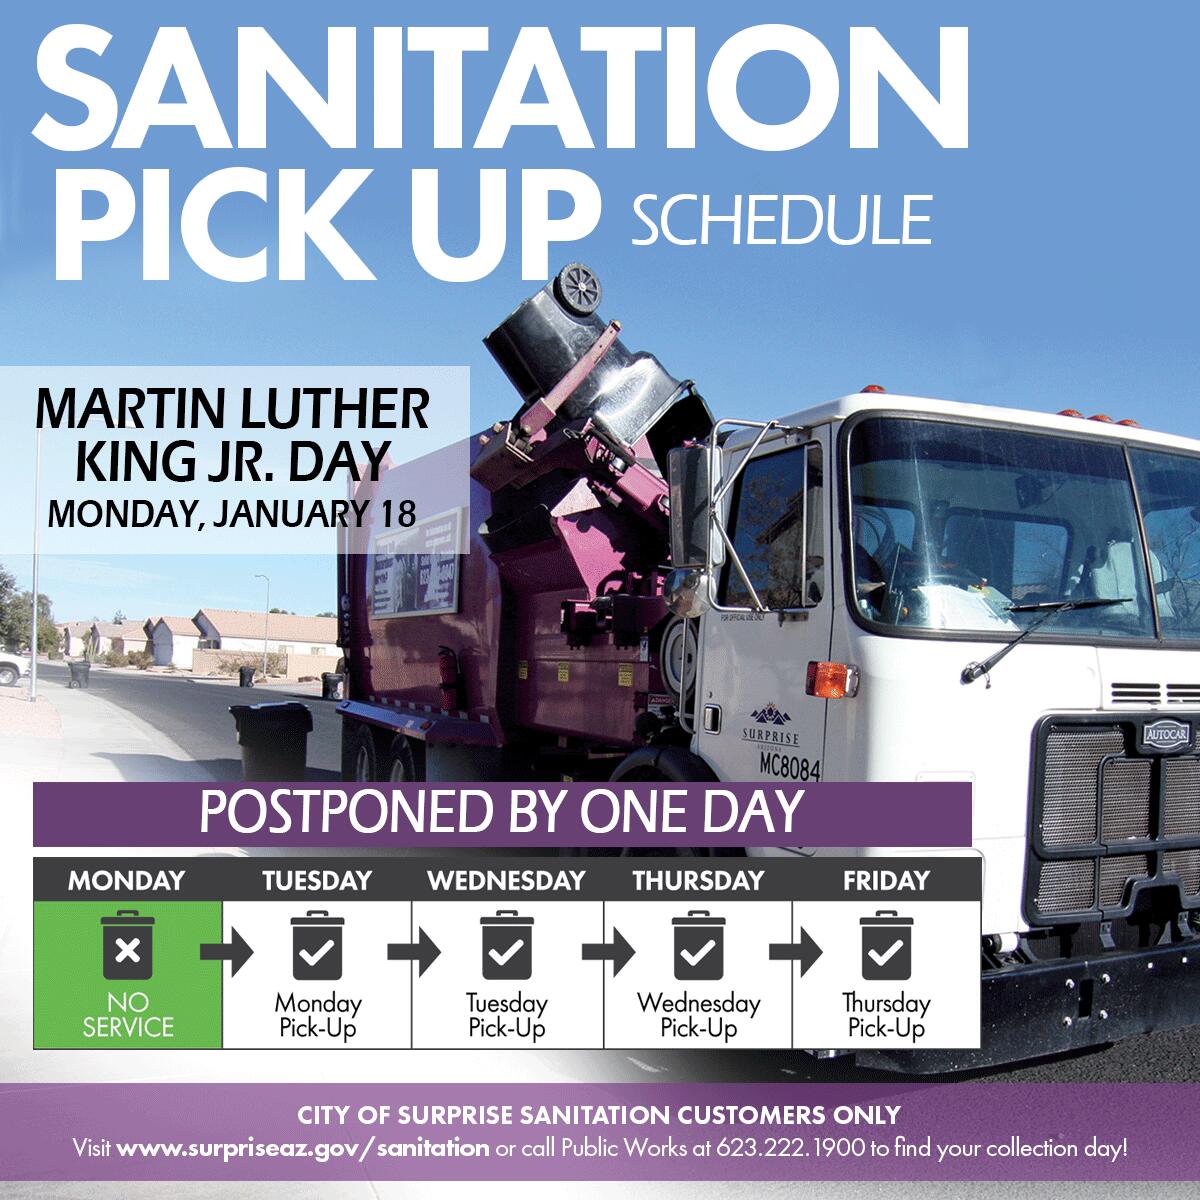 City of Surprise trash schedule changes and closures for MLK Day (City